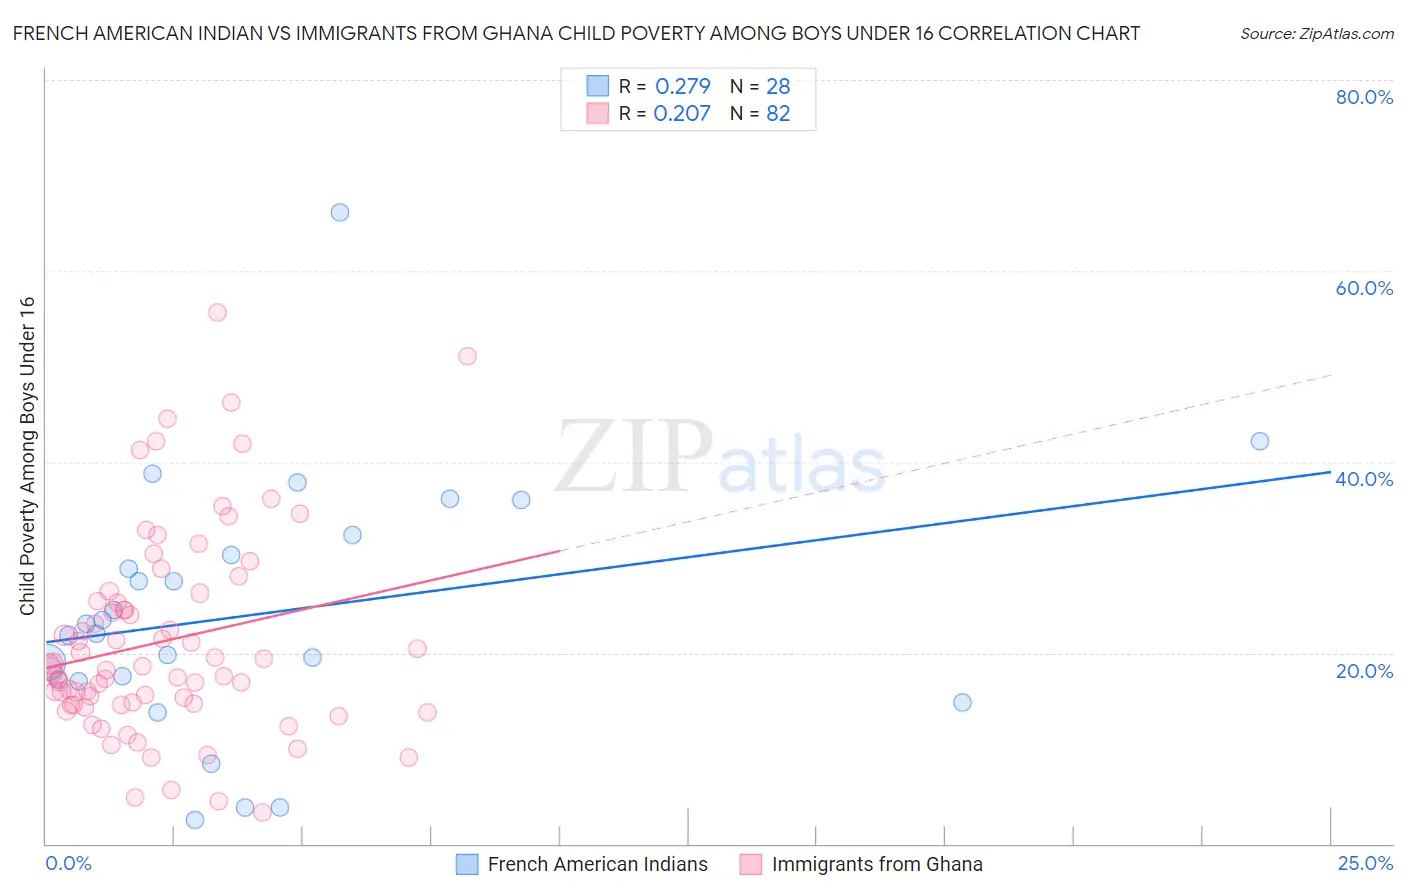 French American Indian vs Immigrants from Ghana Child Poverty Among Boys Under 16